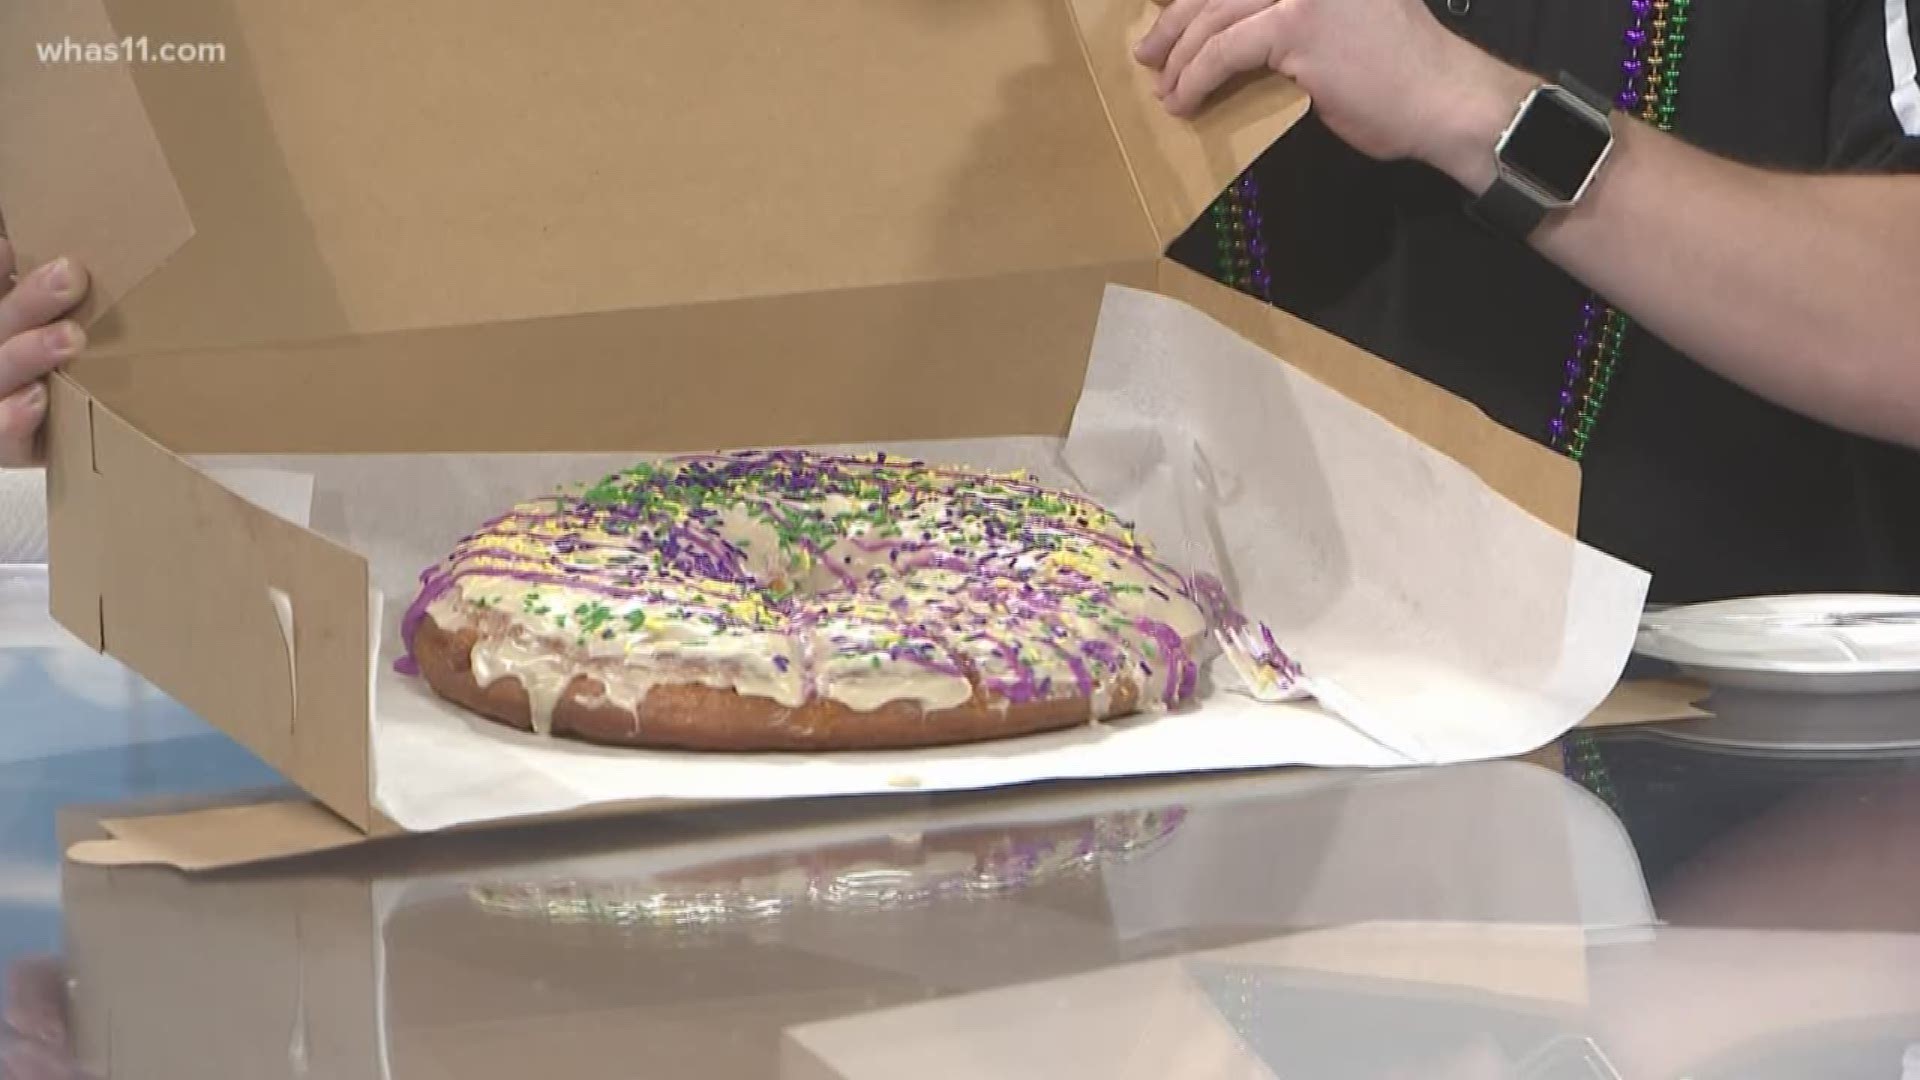 The morning crew got to celebrate Fat Tuesday with a sweet treat from Hi-Five Doughnuts.